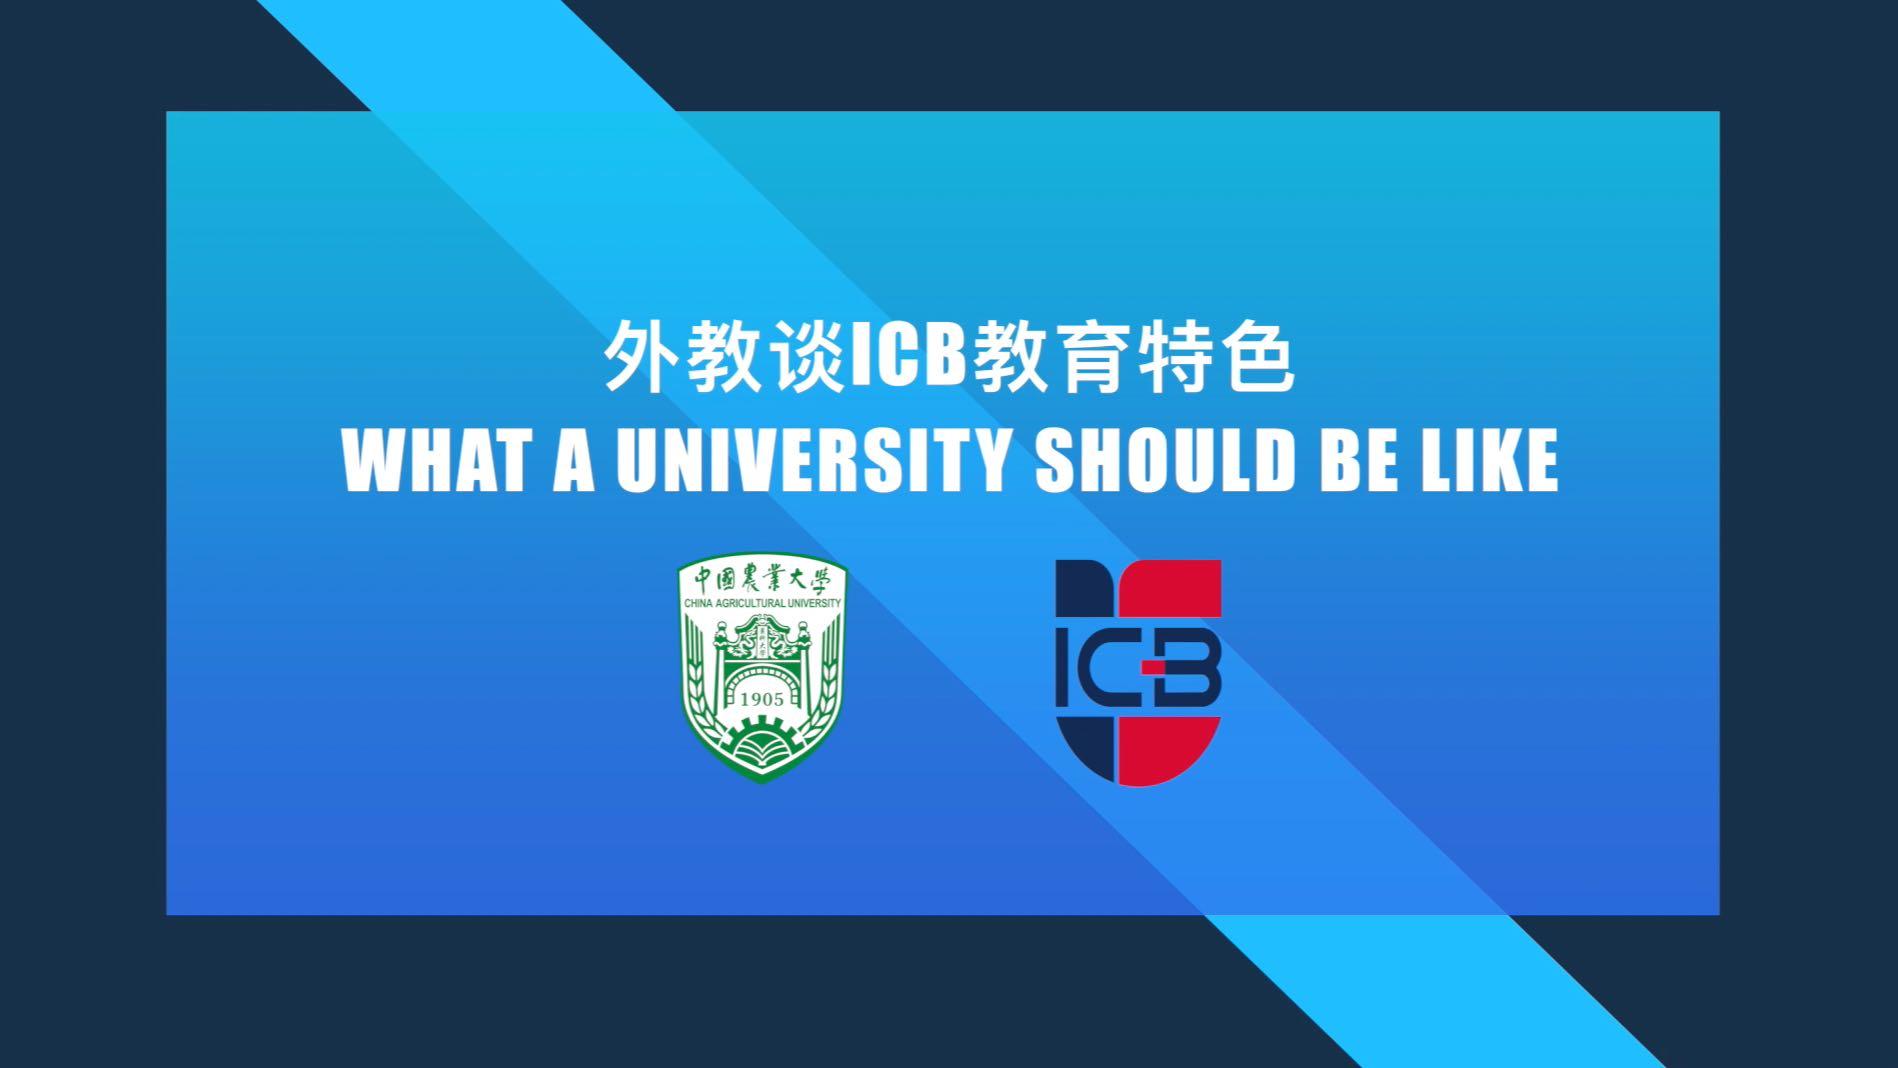 what a university should be like-国院